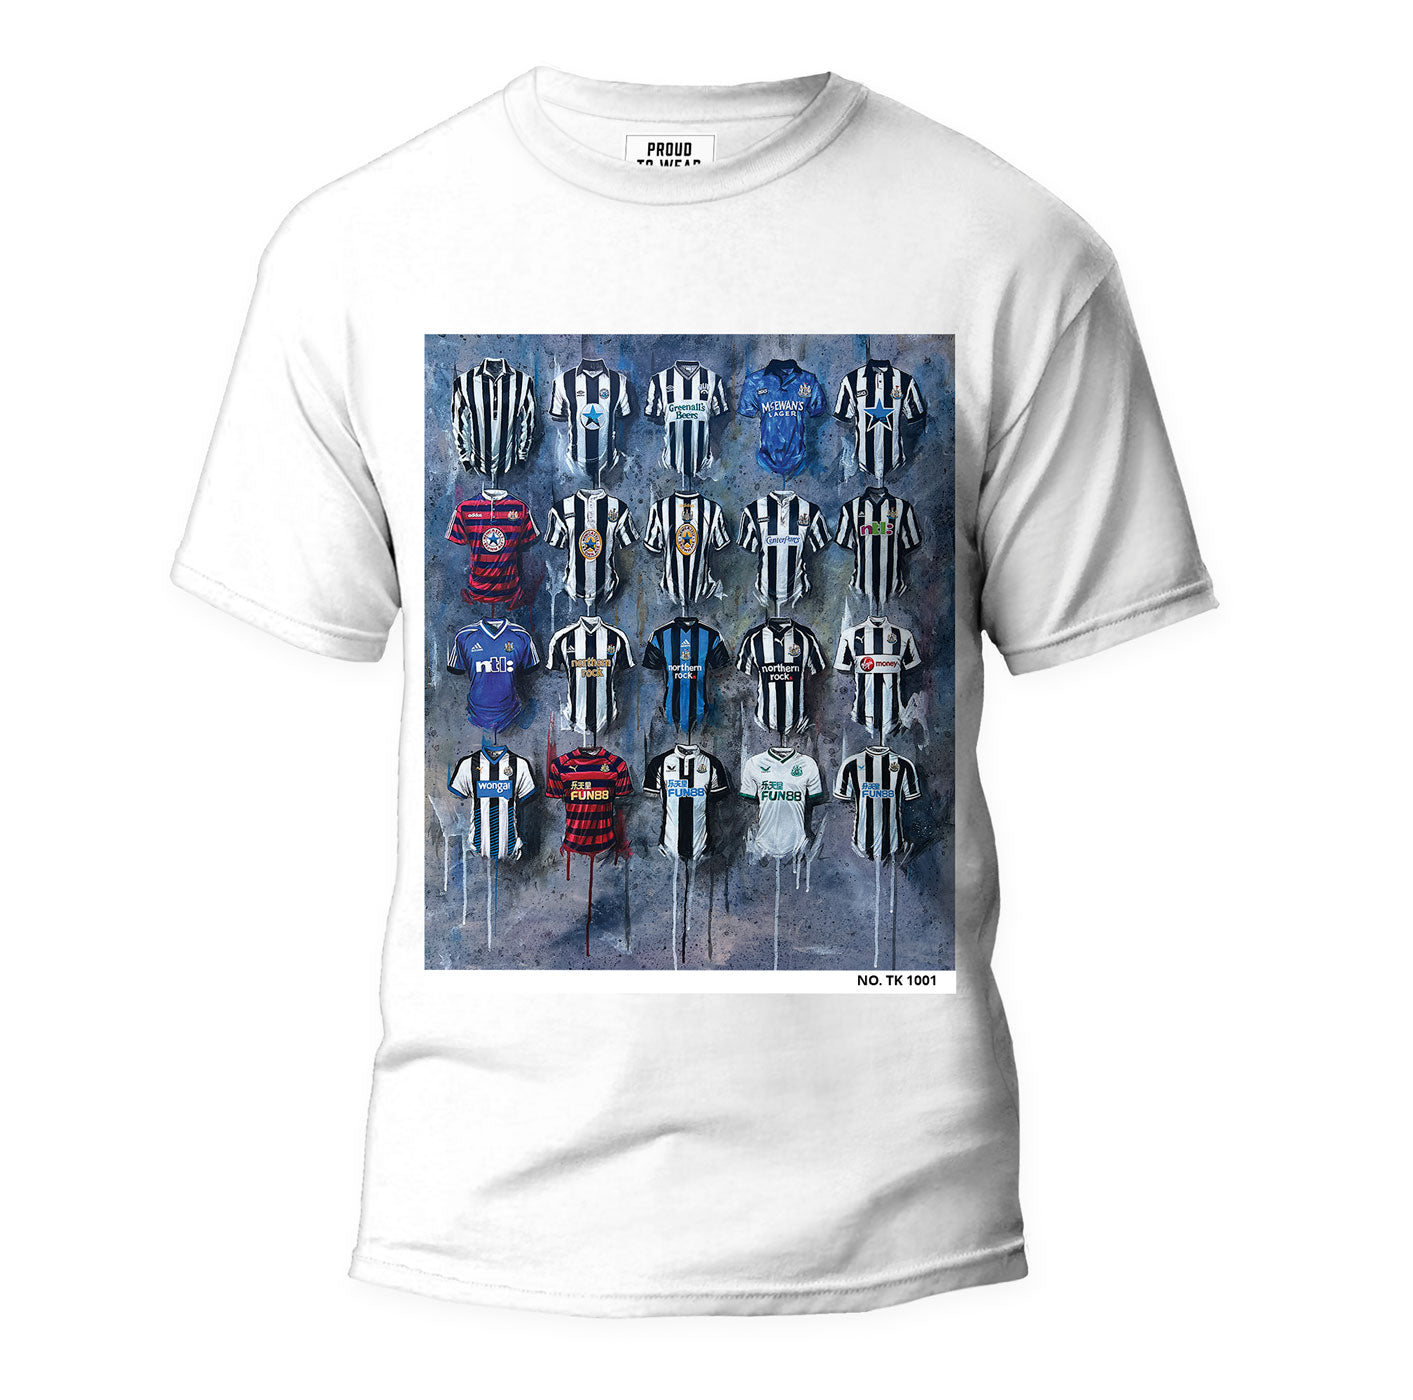 These limited edition Newcastle Toon Collection T-shirts designed by Terry Kneeshaw showcase unique artwork for the team. Each shirt is individually numbered and comes in sizes ranging from xxs to xxxl. The collection features a choice of black or white T-shirts with vibrant colors that bring the team's spirit to life. These one-off designs are a must-have for any Newcastle fan looking to add a unique piece to their collection.